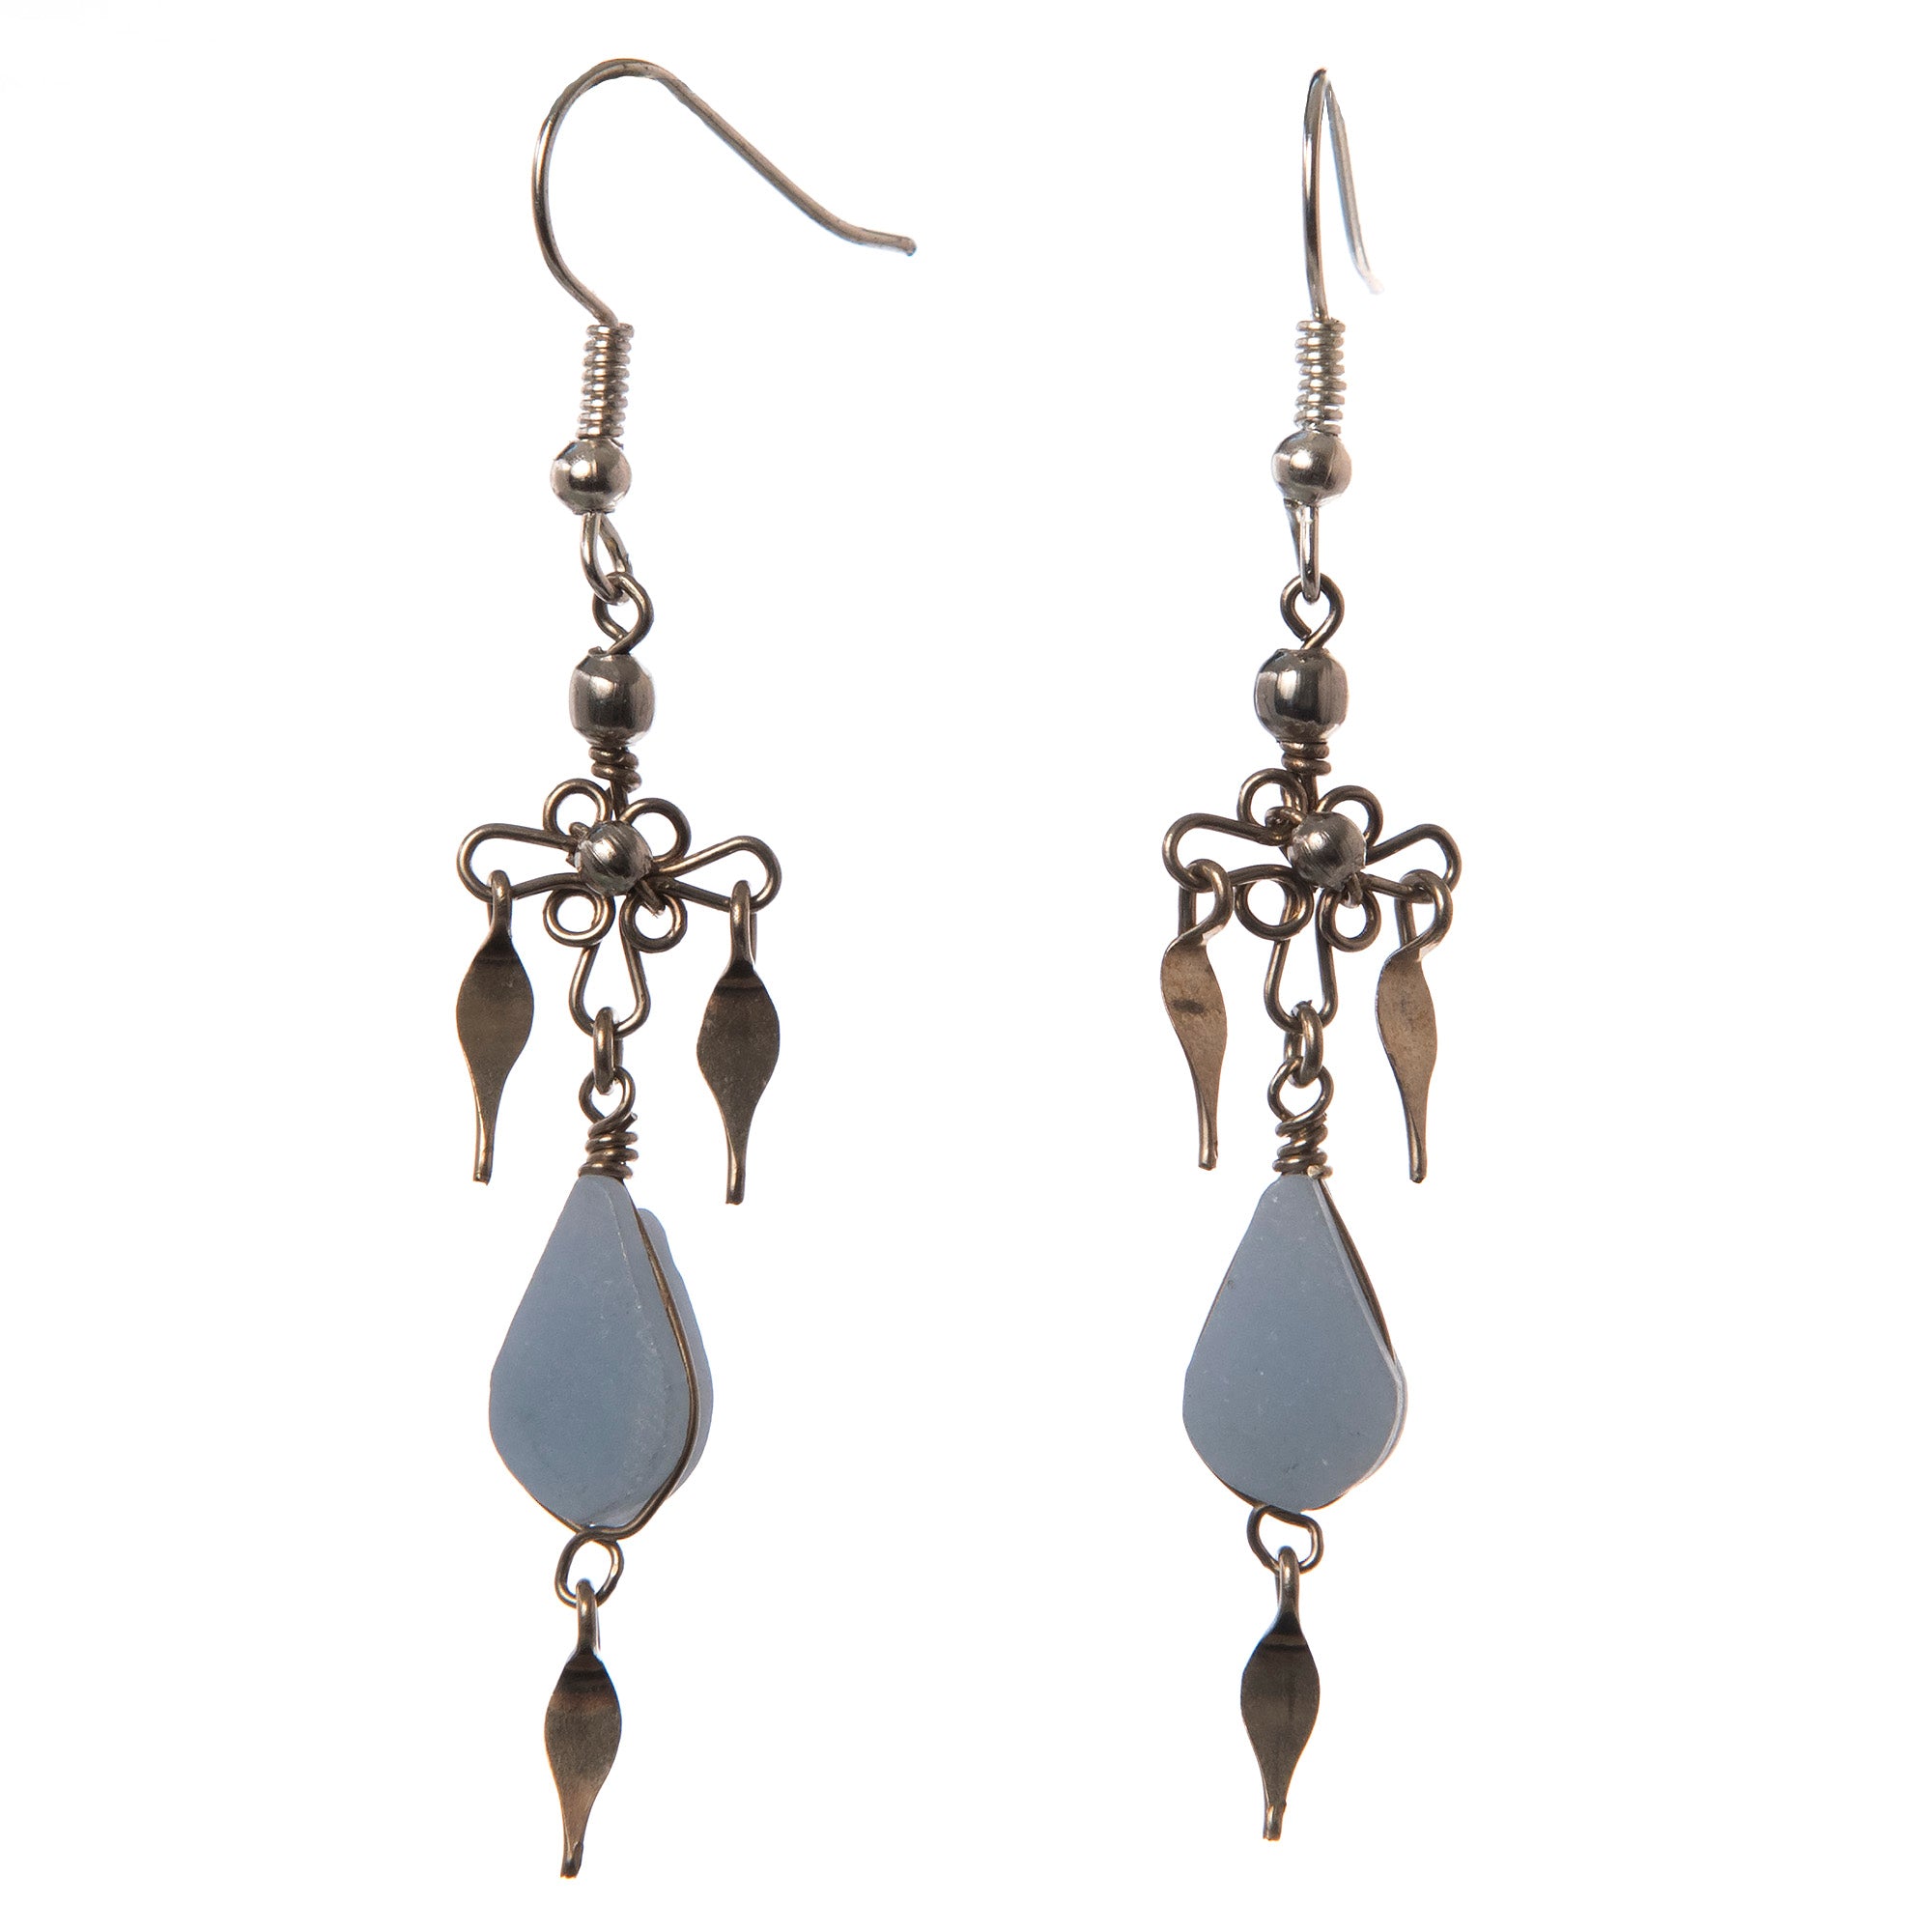 Celestine stone and silver wire earrings - made by Peruvian Amazon artisan